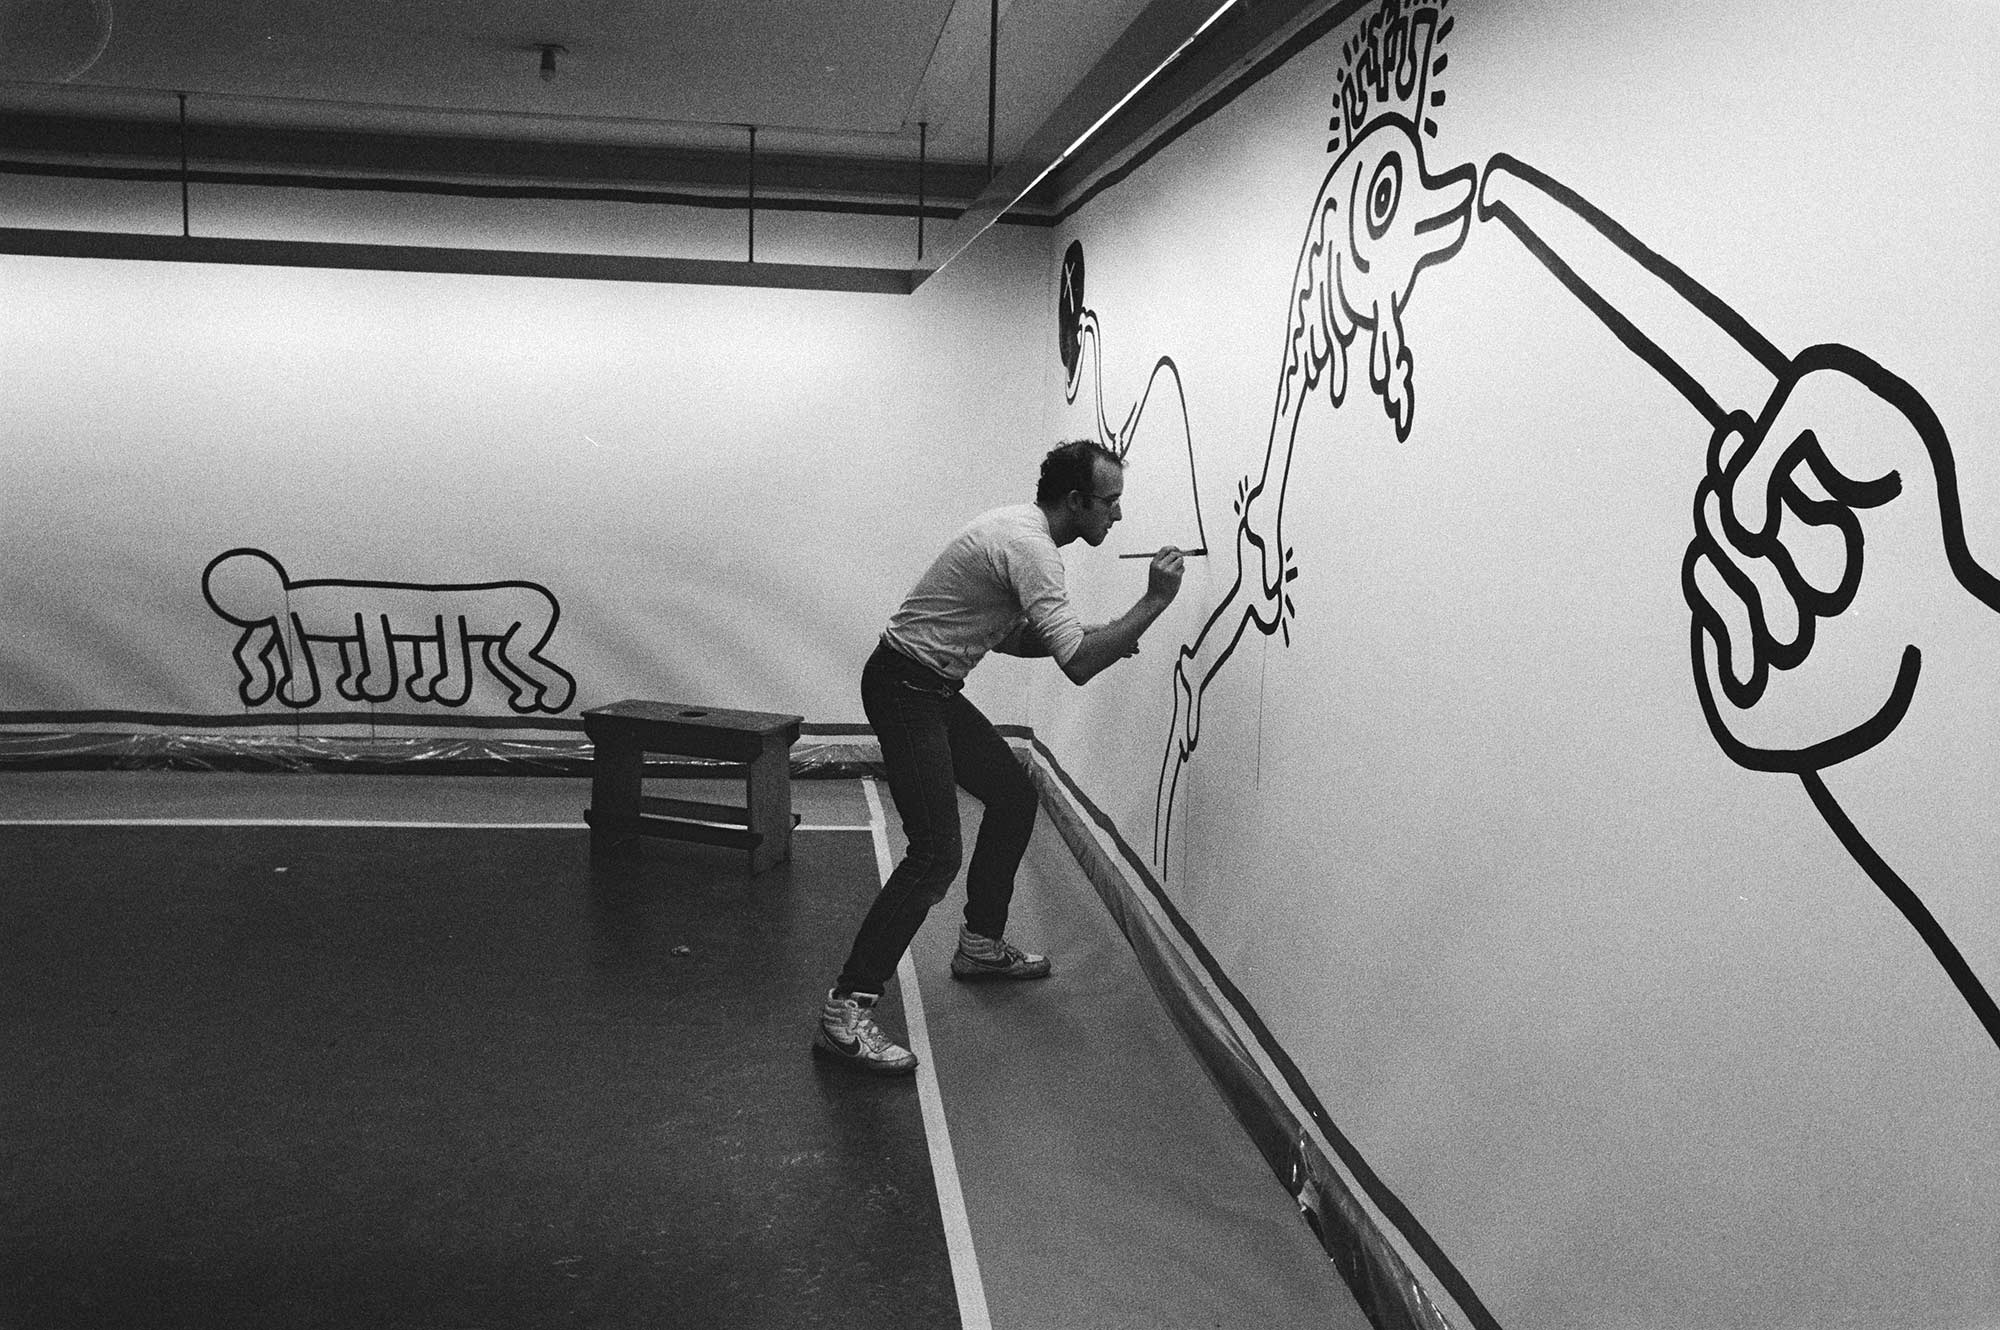 Keith Haring drawing Amsterdam Notes in the Stedelijk Museum Amsterdam, March 1986. Photo: Rob Bogaerts, Nationaal Archief / Anefo. Amsterdam Notes © Keith Haring Foundation.